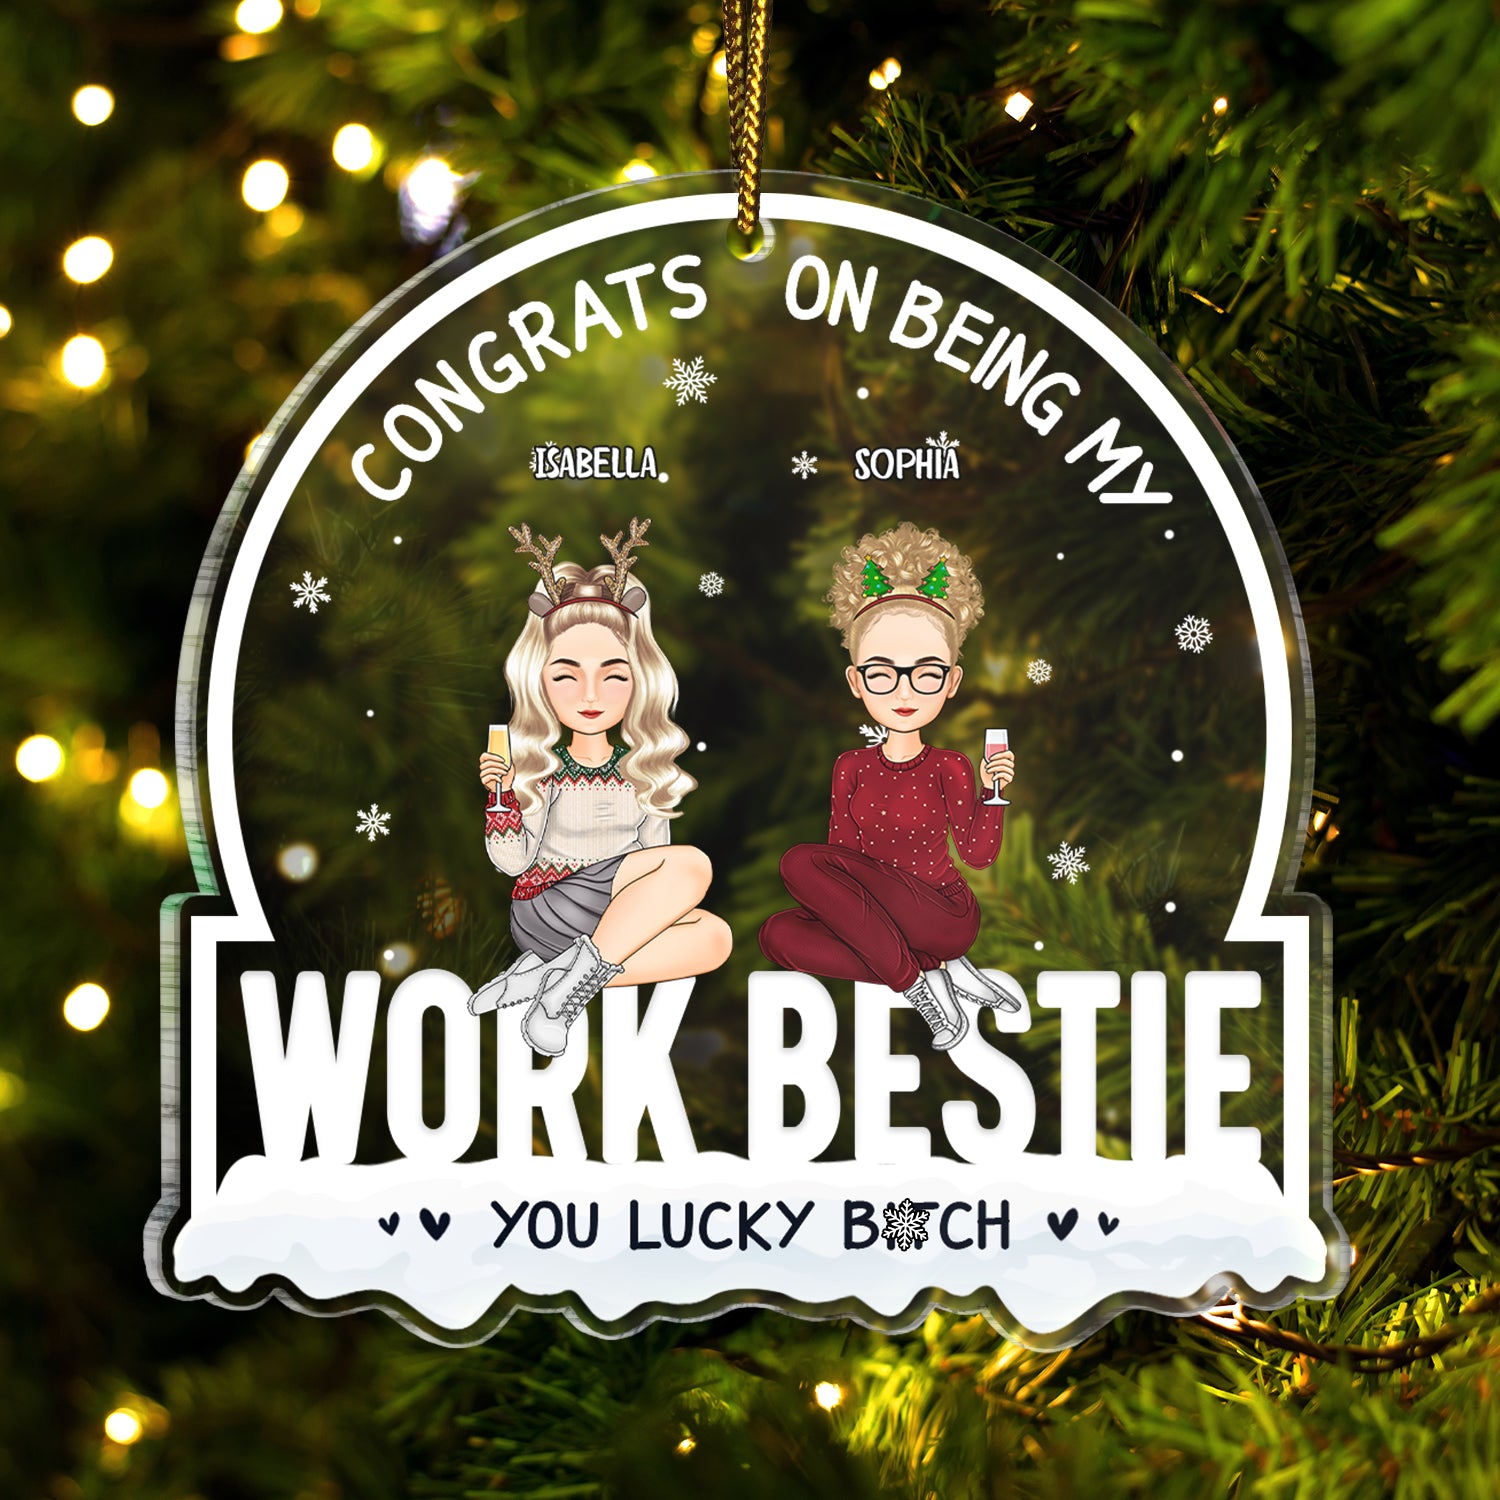 Christmas Coworker Congrats On Being My Work Bestie - Gift For Colleagues - Personalized Custom Shaped Acrylic Ornament